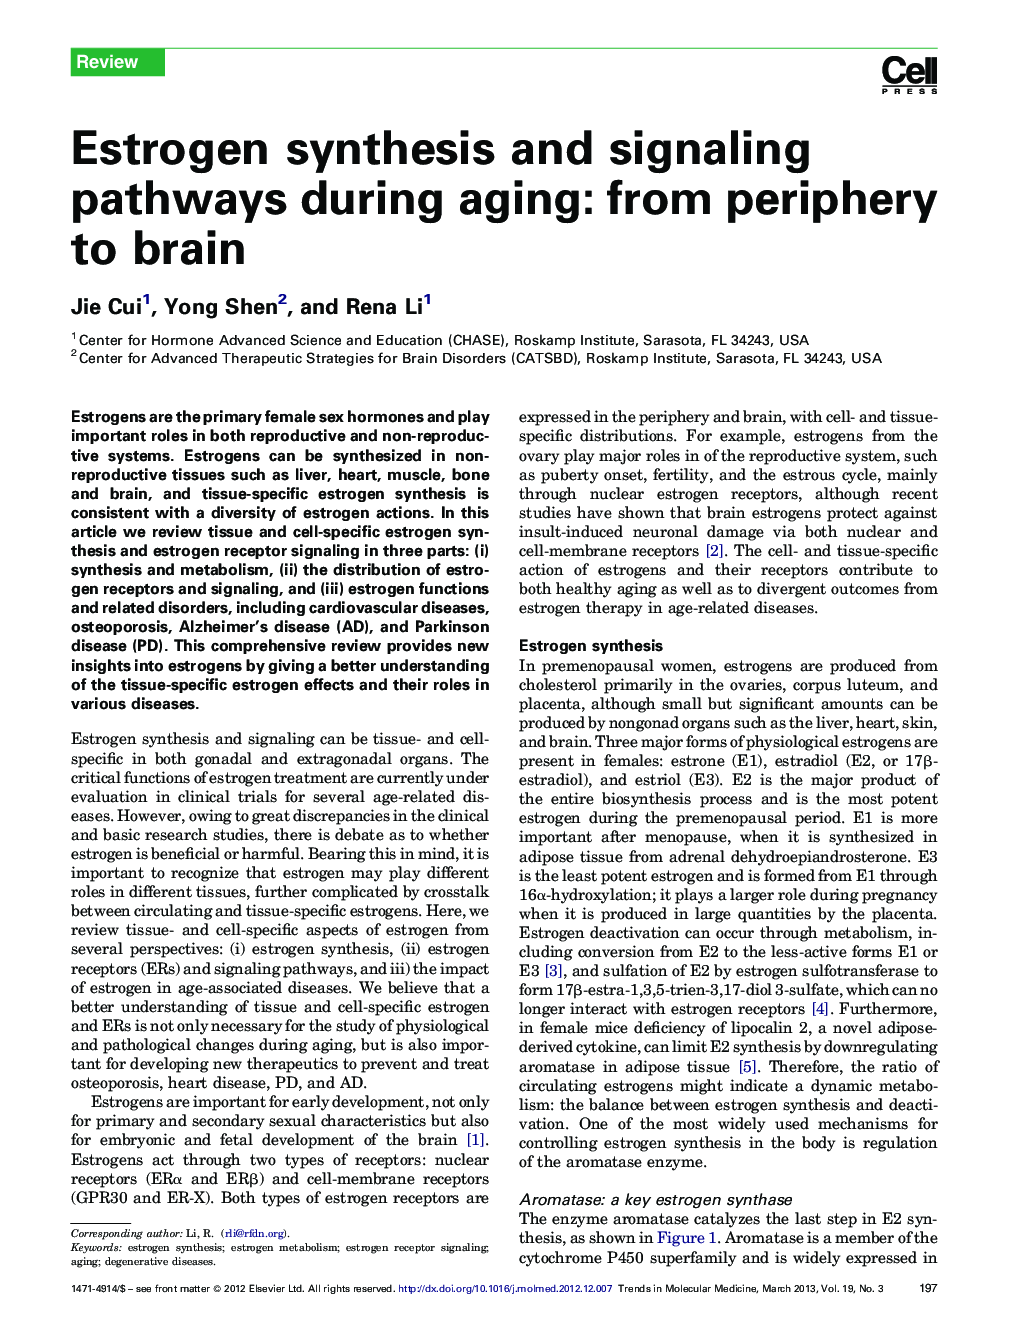 Estrogen synthesis and signaling pathways during aging: from periphery to brain